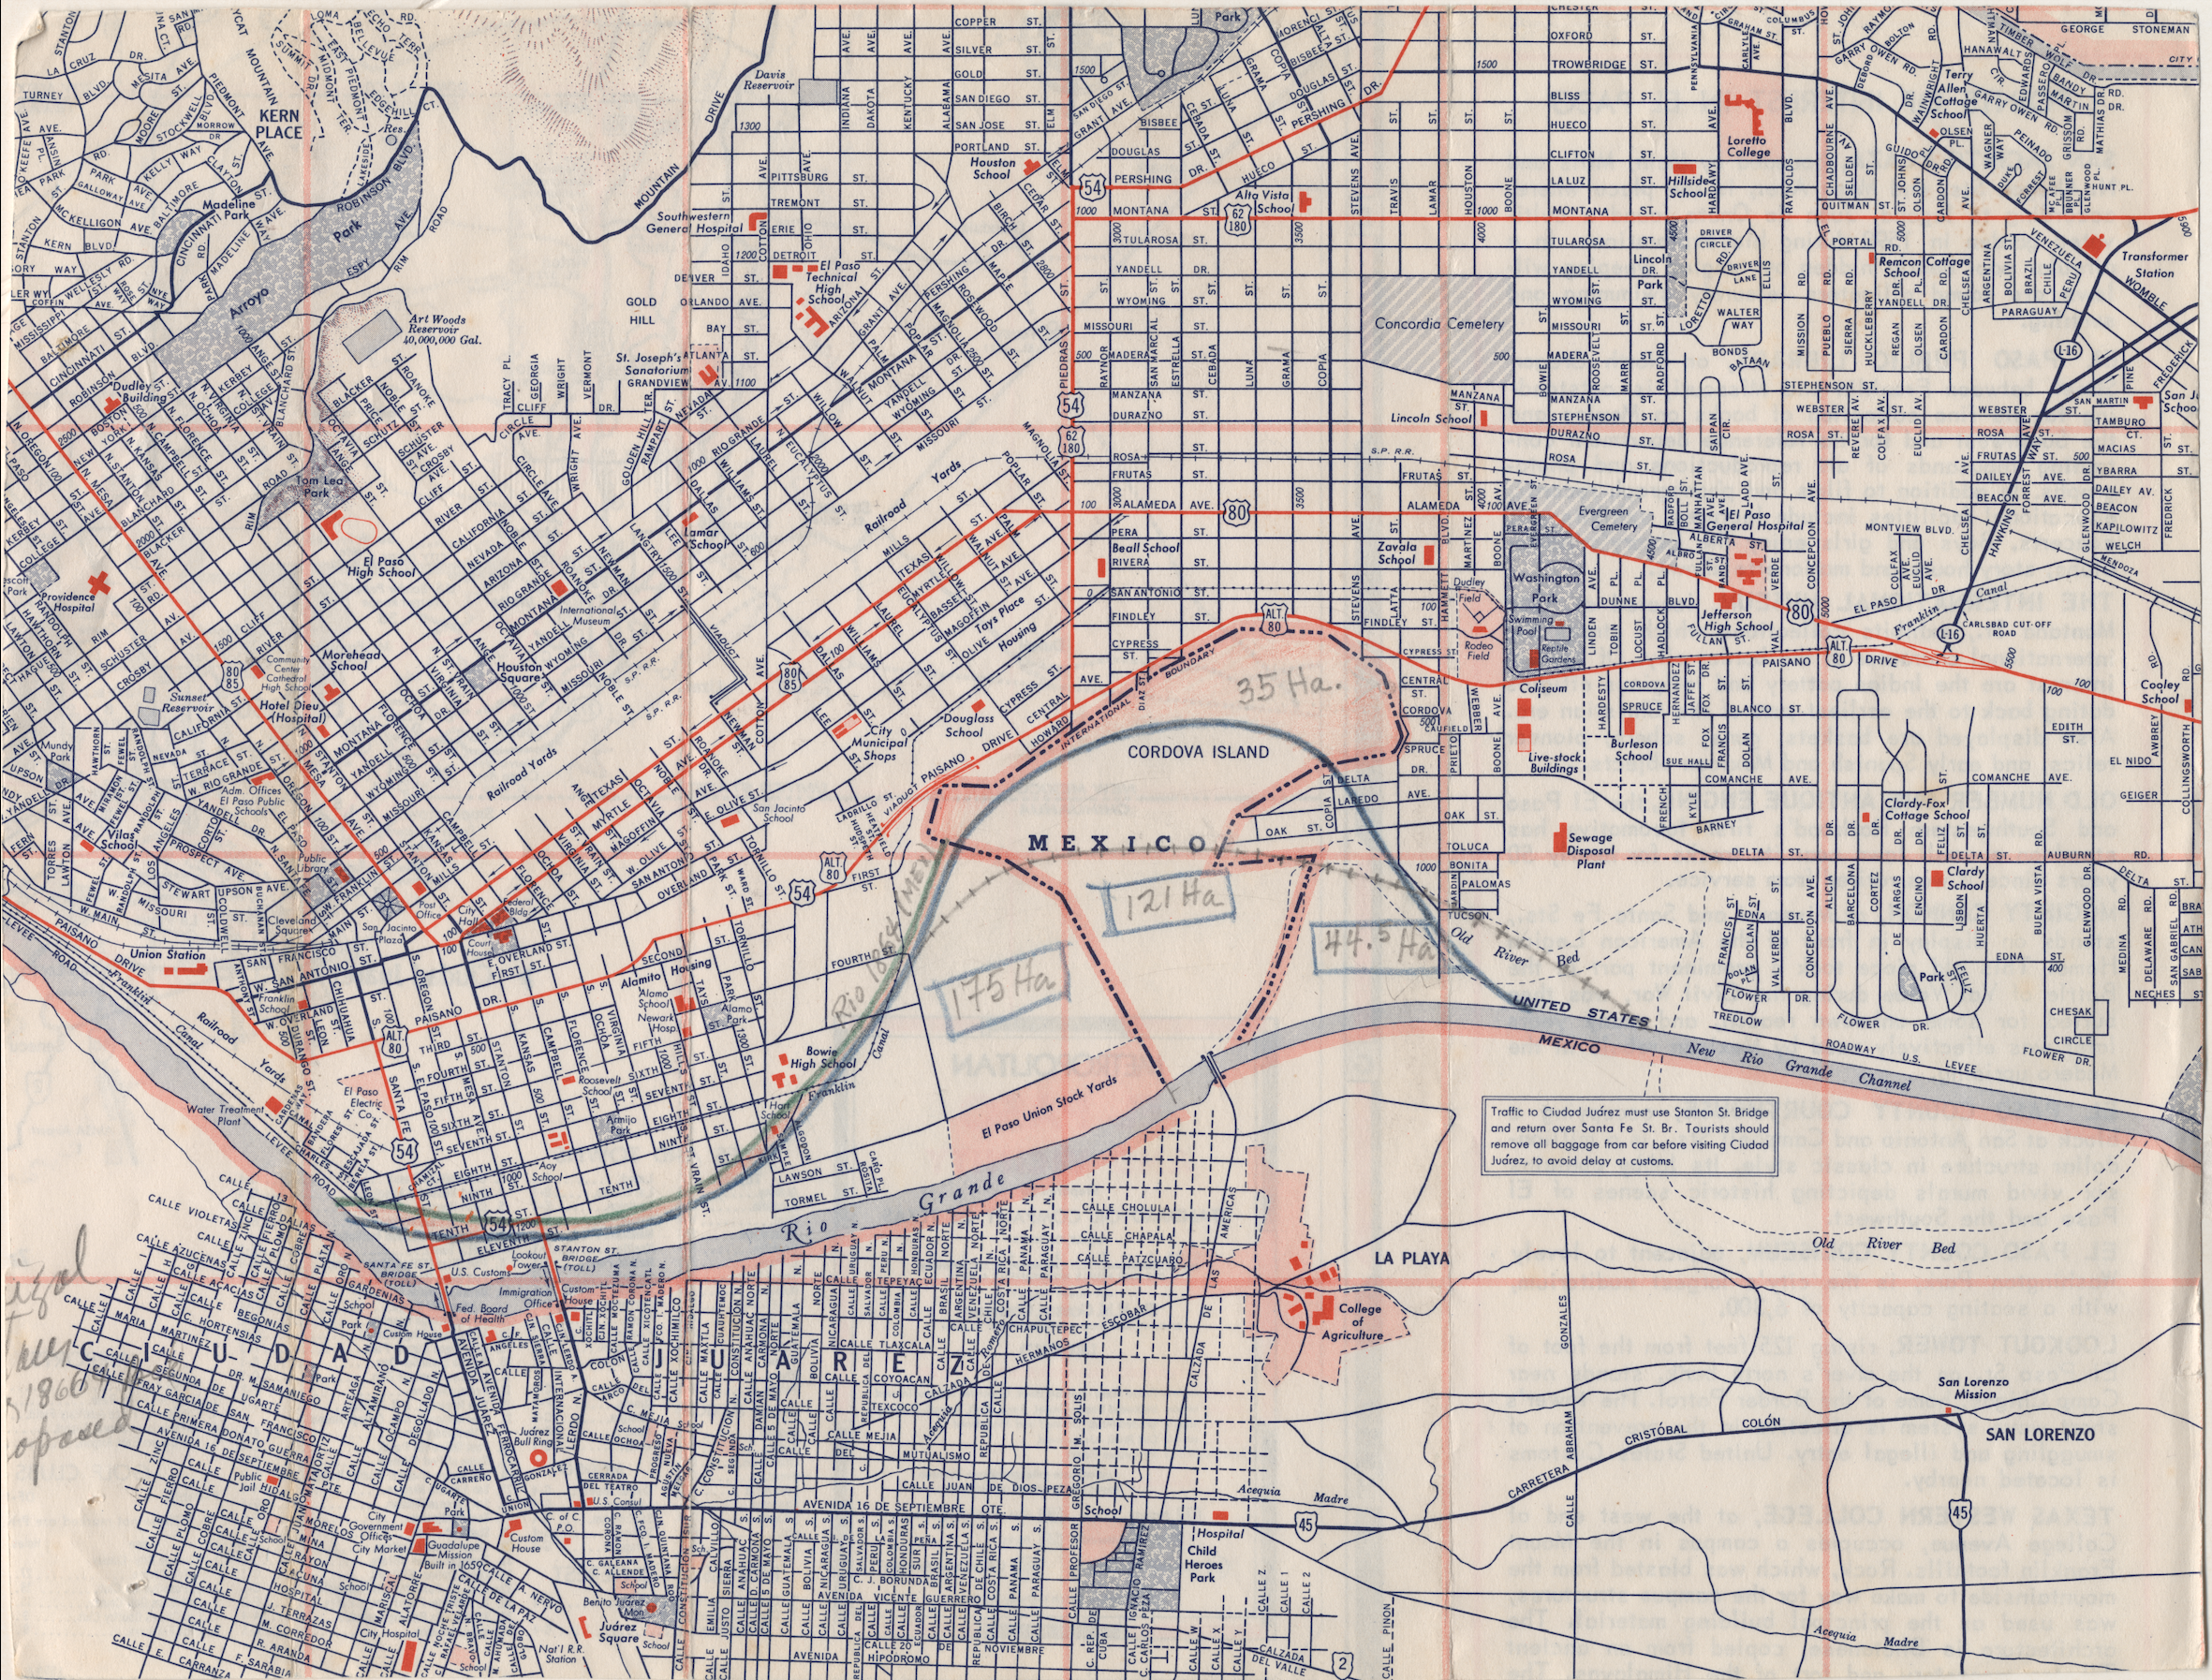 Part of old-looking, color street map of El Paso. Penciled writing and colored, hand-drawn lines indicates a possible resolution to the Chamizal dispute.